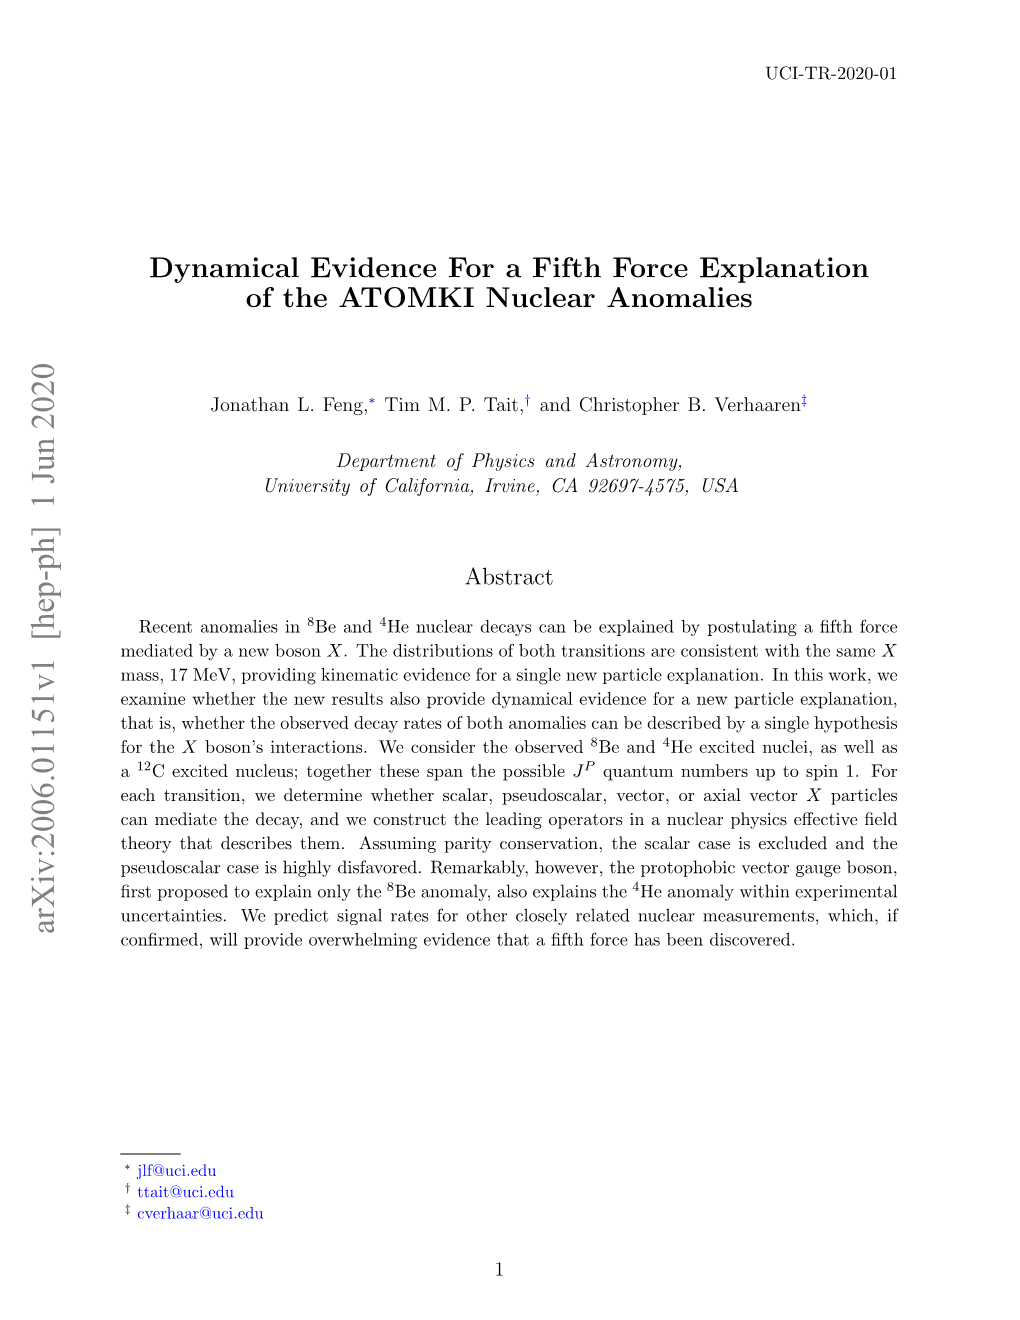 Arxiv:2006.01151V1 [Hep-Ph] 1 Jun 2020 Conﬁrmed, Will Provide Overwhelming Evidence That a ﬁfth Force Has Been Discovered